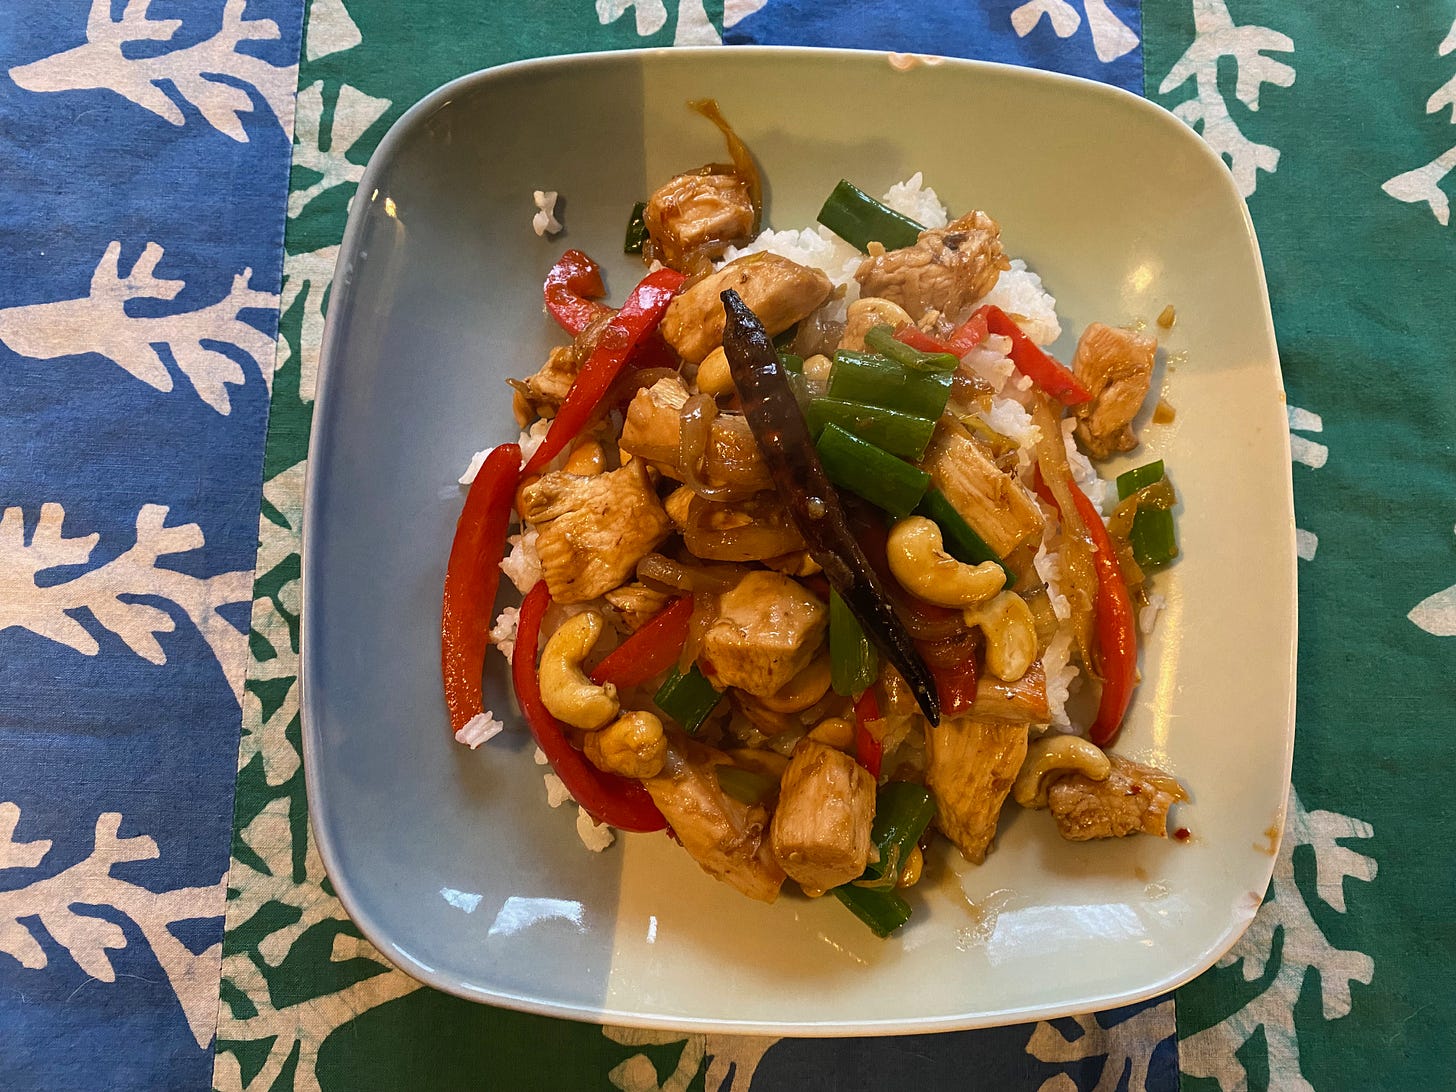 A square plate full of stir-fry on a green and blue striped placemat. The stir-fry is full of chunks of chicken, cashews, strips of red pepper, and bright green scallions.